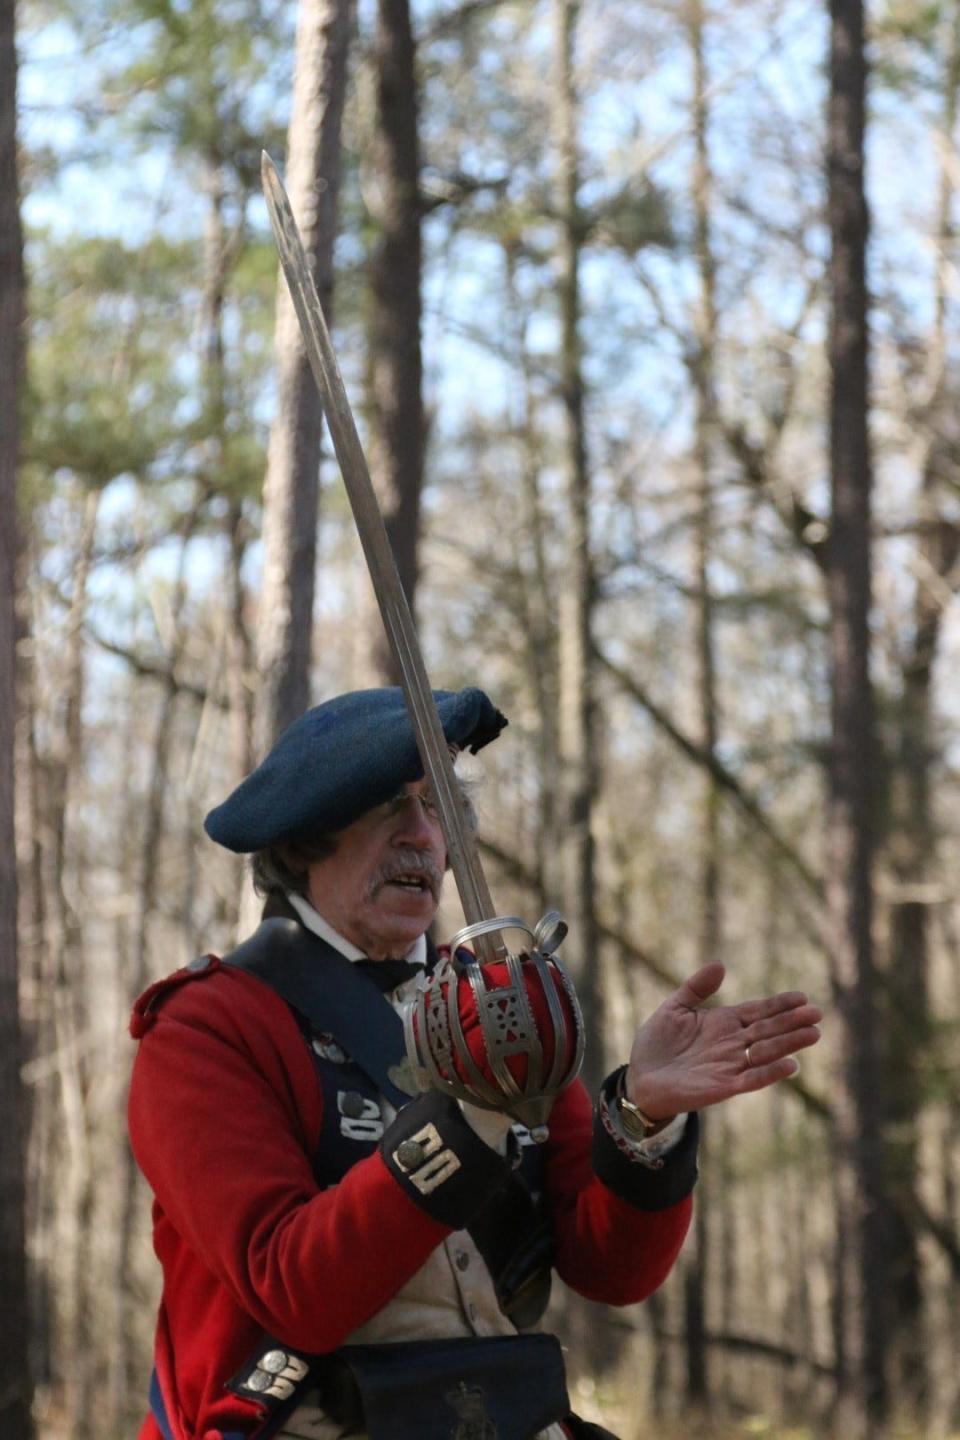 Living historian portraying a Scottish Highlander demonstrating the sword tactics used by the Scots during the Battle of Moores Creek Bridge.